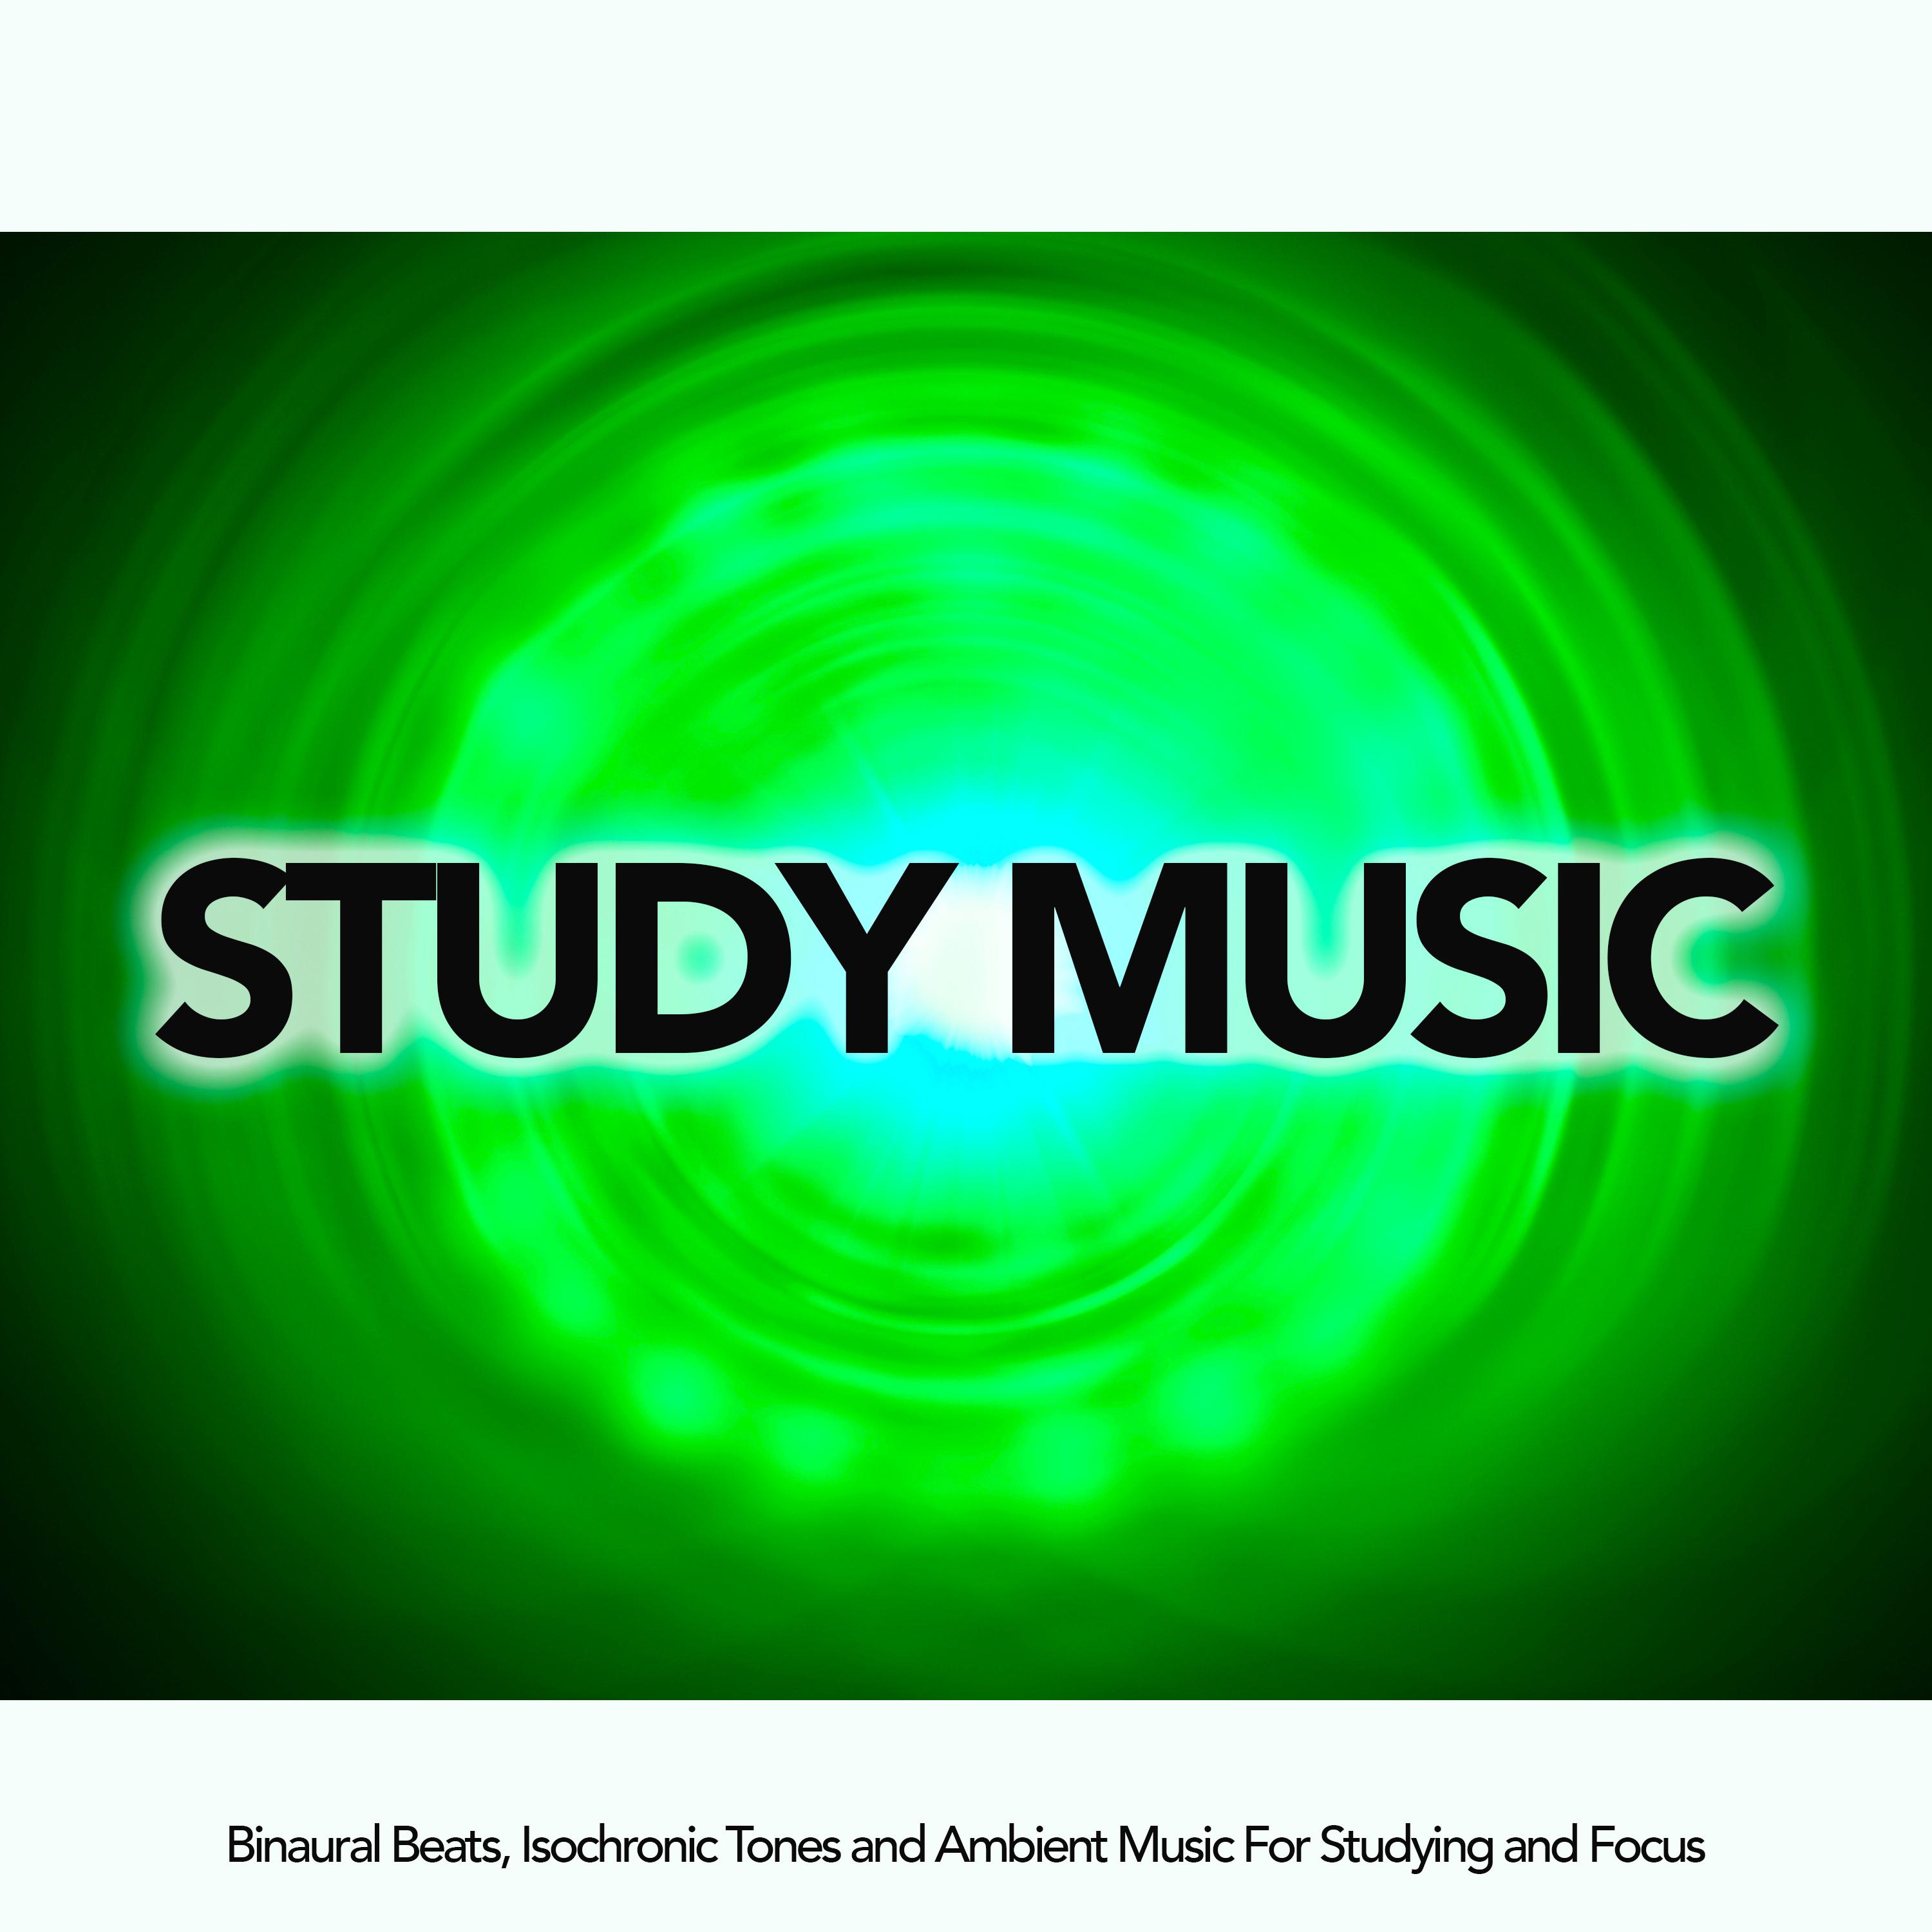 Studying Music to Study By